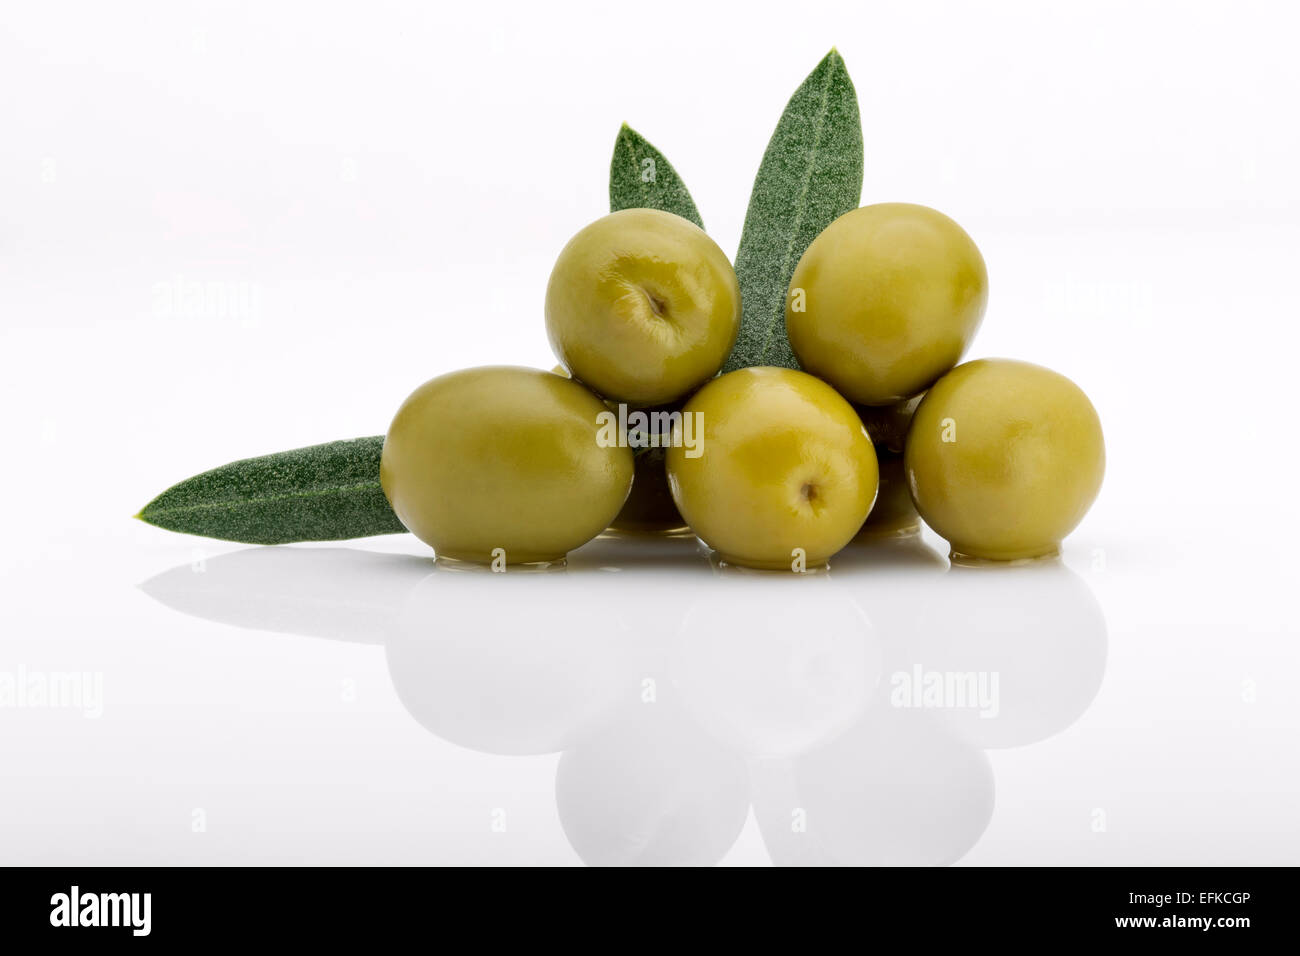 Whole pickled green olives Stock Photo